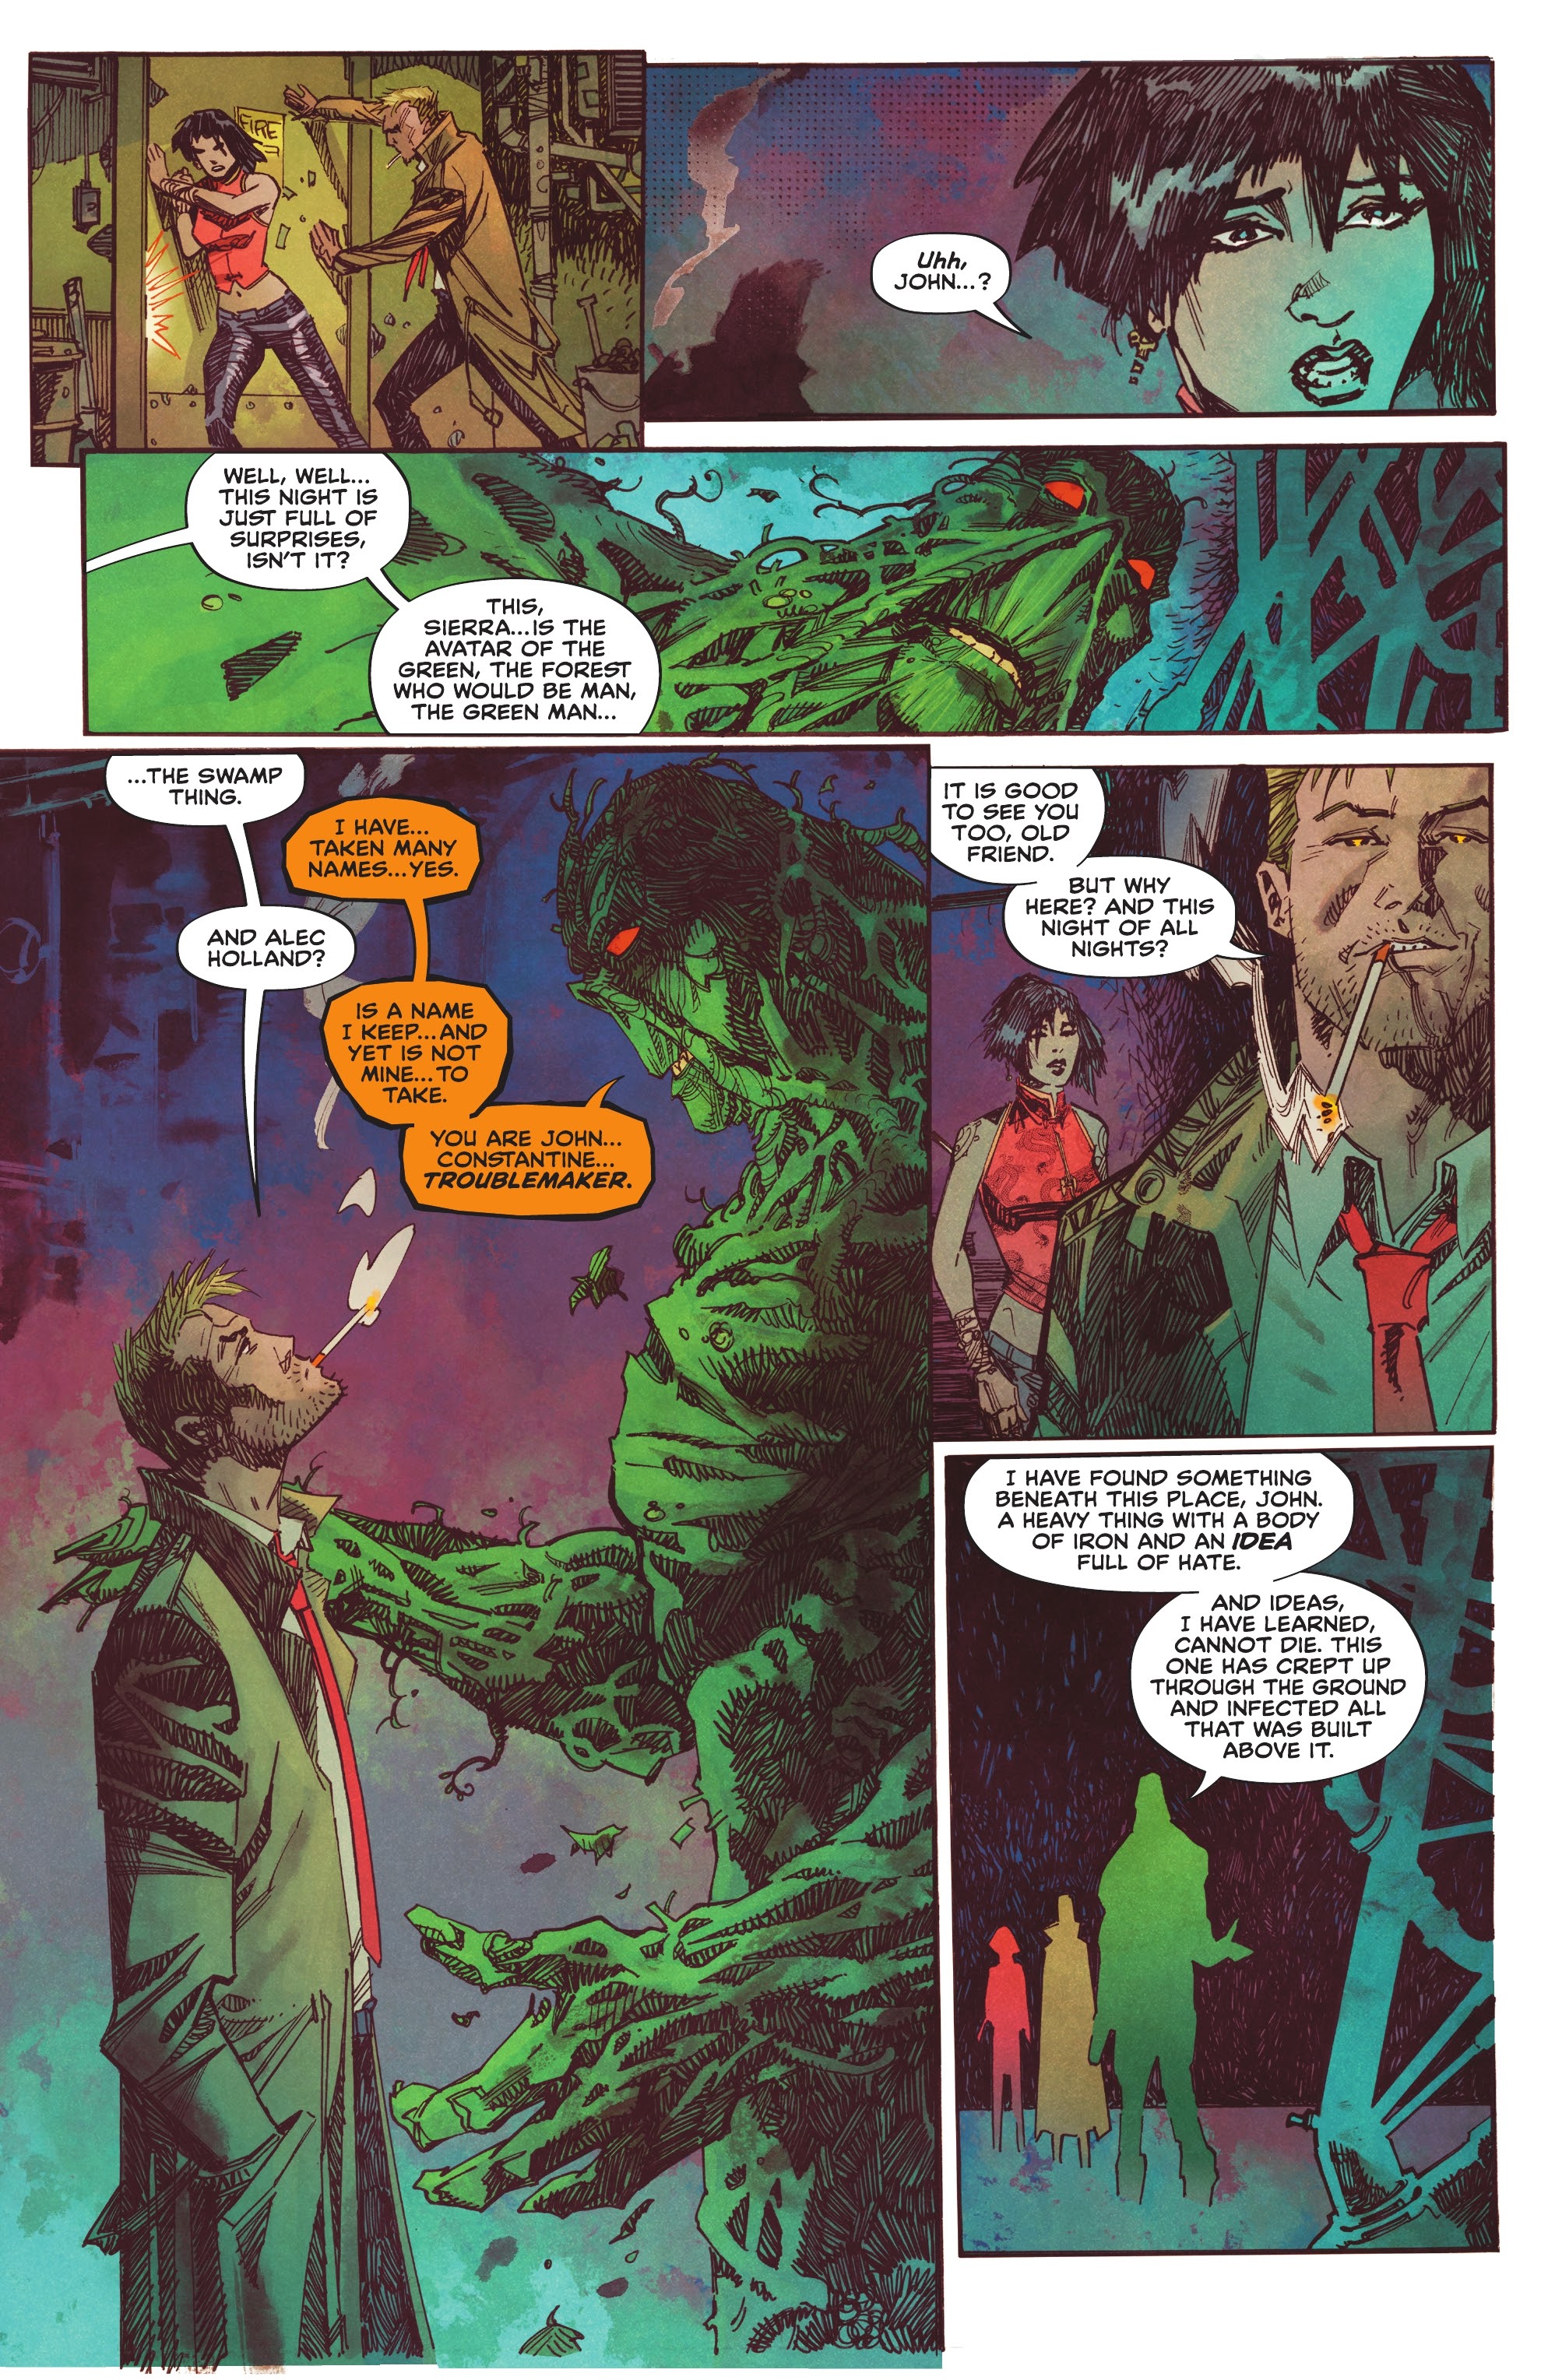 Read online The Swamp Thing comic -  Issue #5 - 14